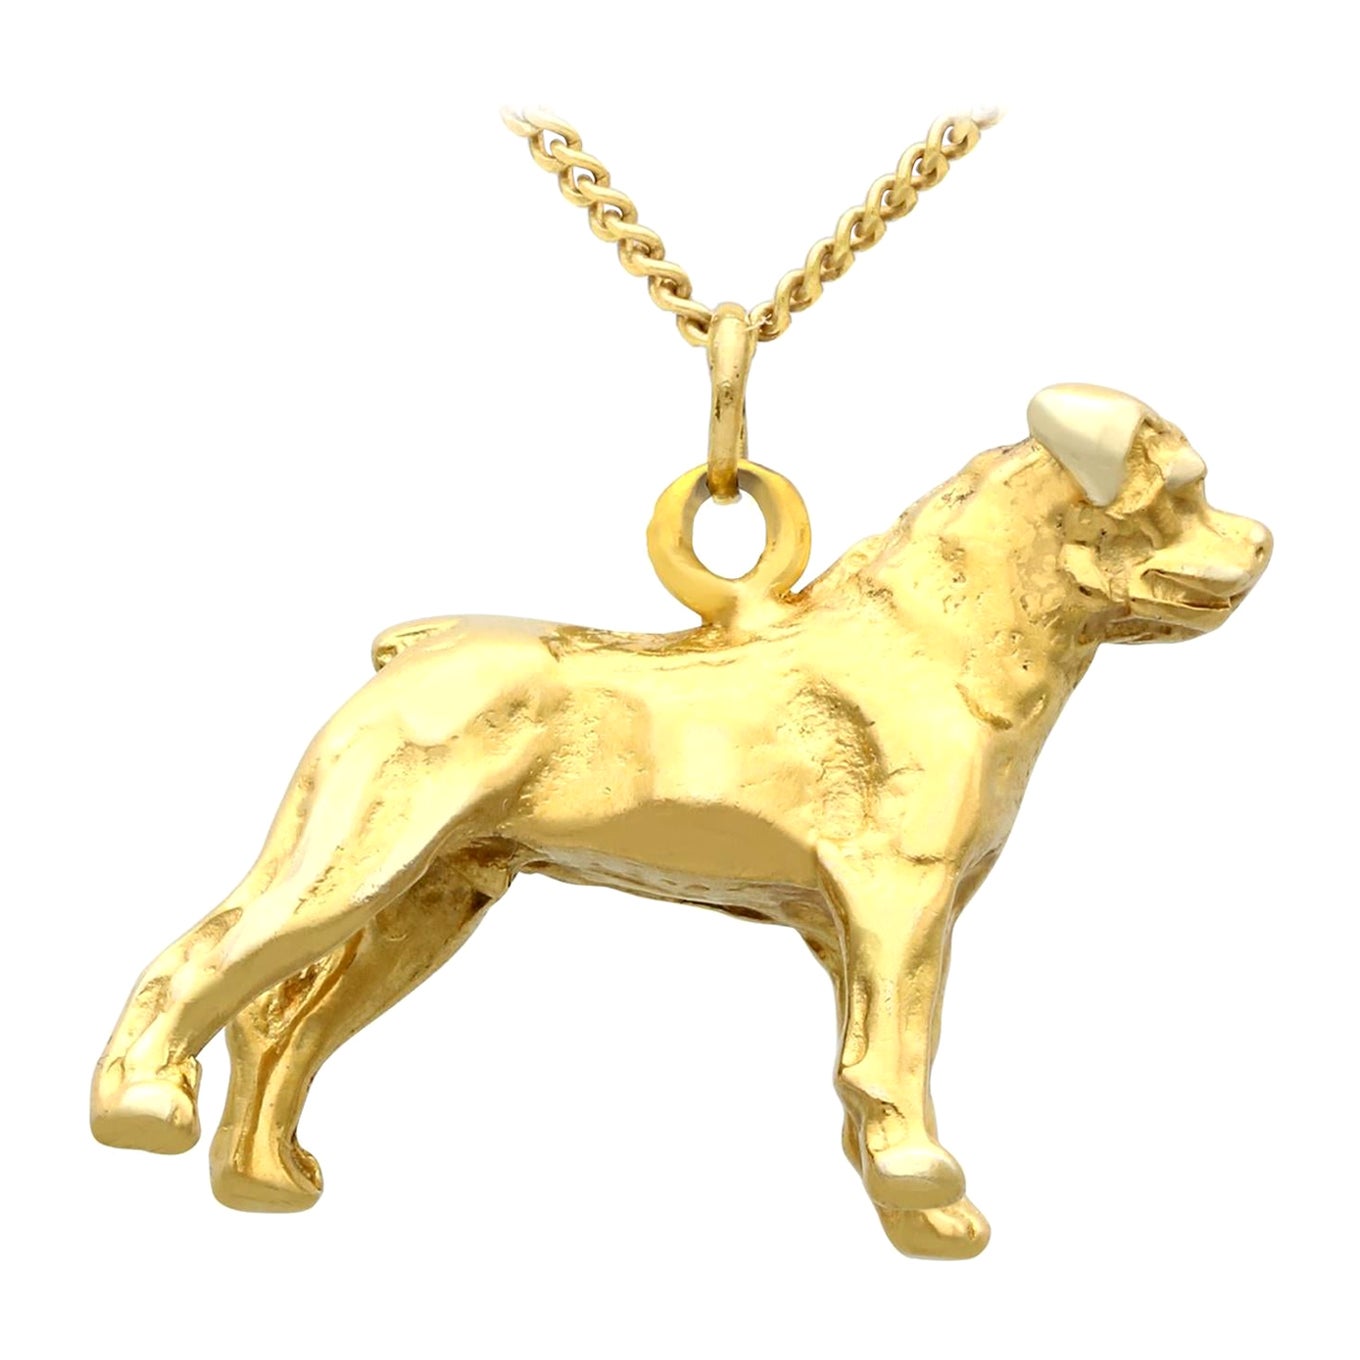 0.83 in x 0.39 in 14K White Gold Puppy Charm Pendant